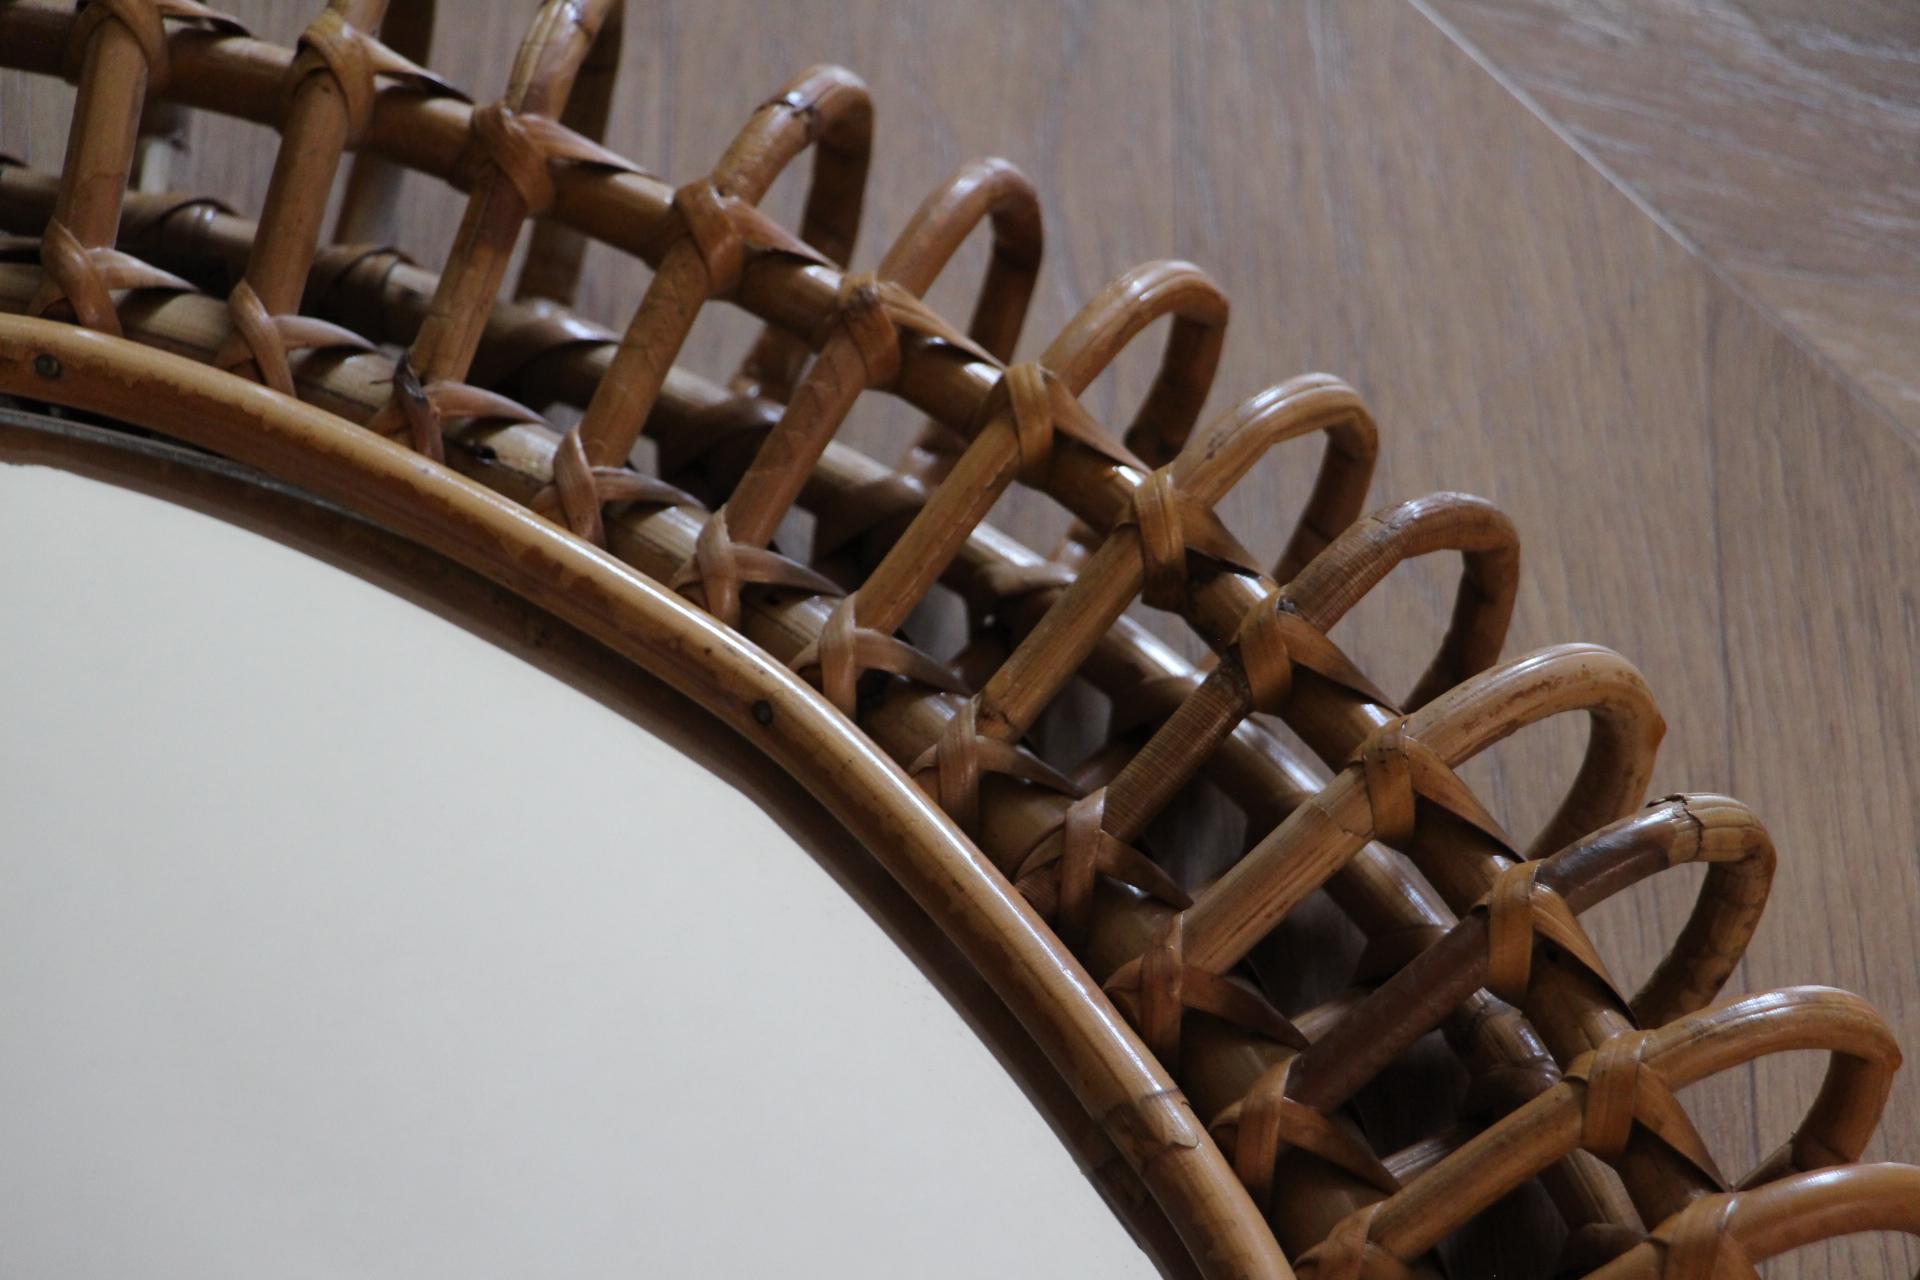 Vintage 1960s Rattan and Bamboo Round Wall Mirror by Franco Albini For Sale 2